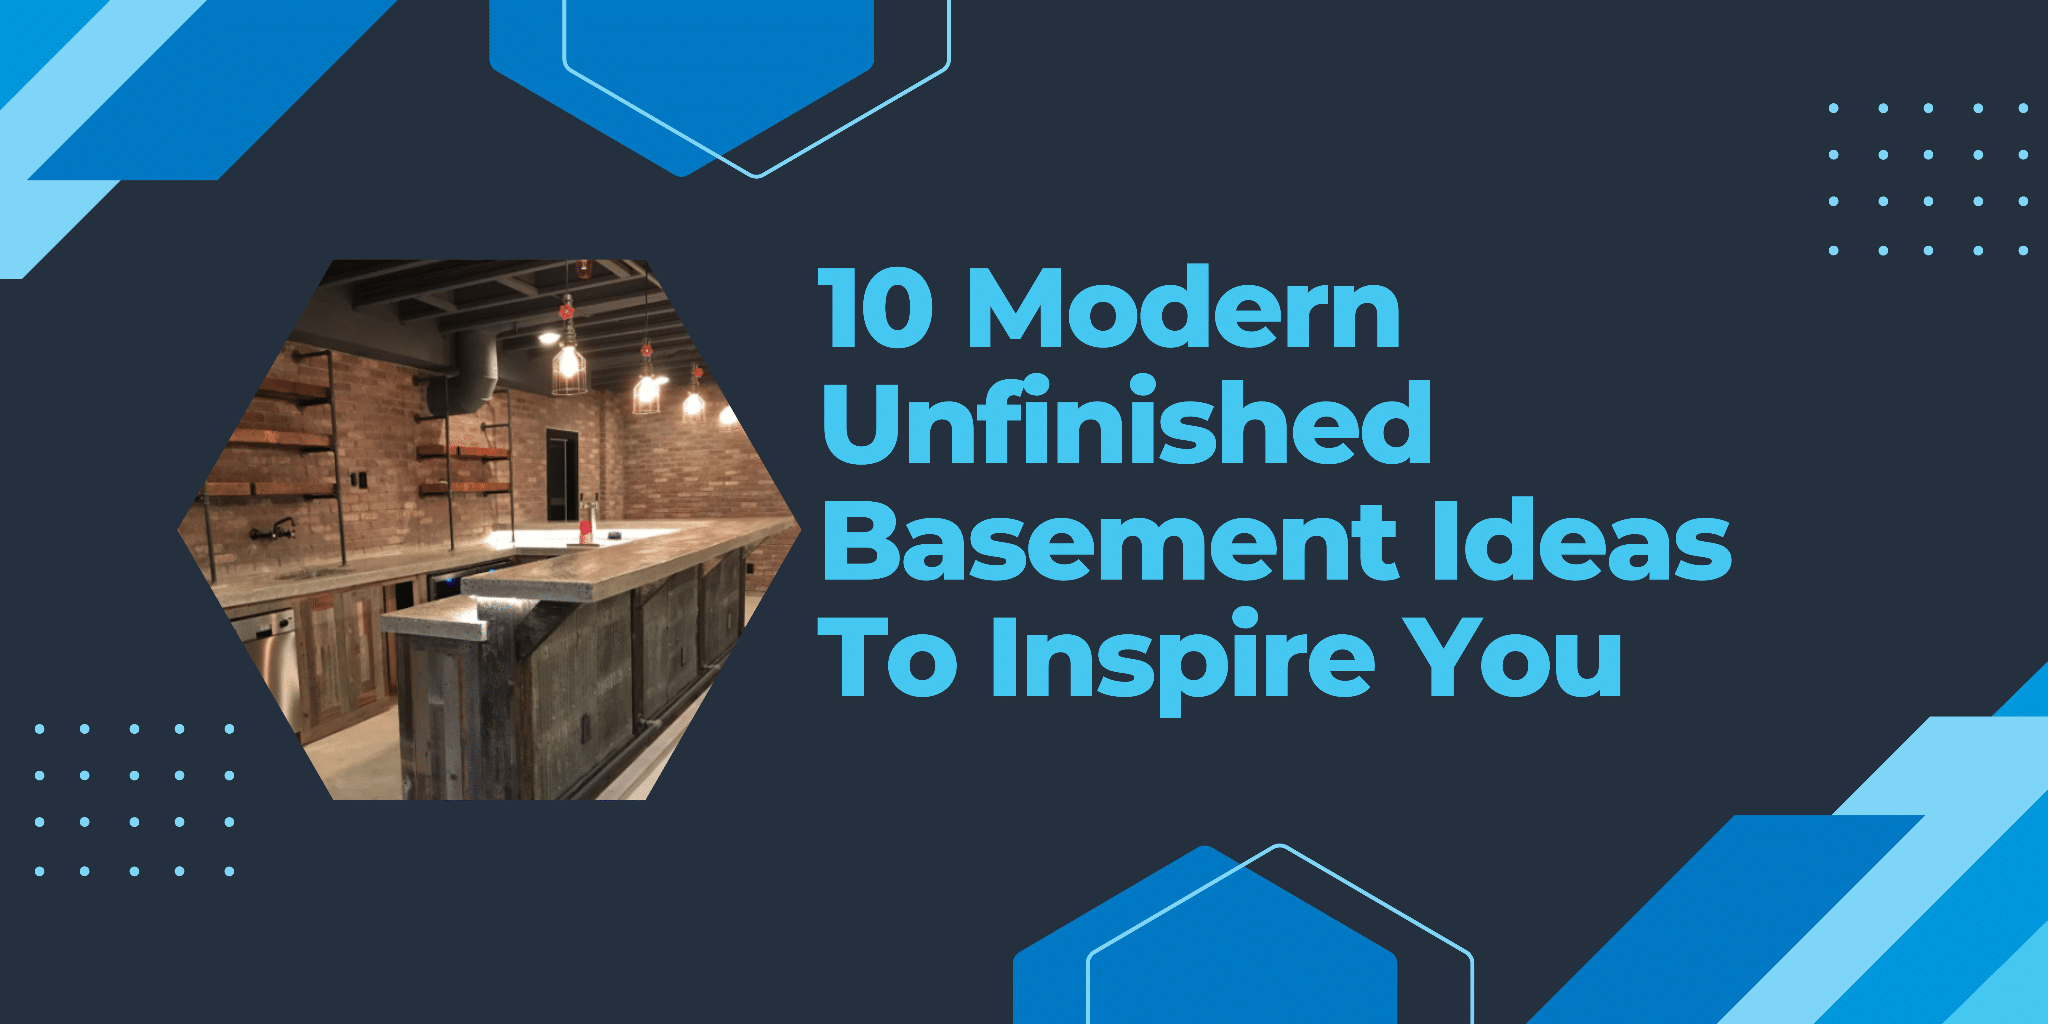 10 Modern Unfinished Basement Ideas To Inspire You